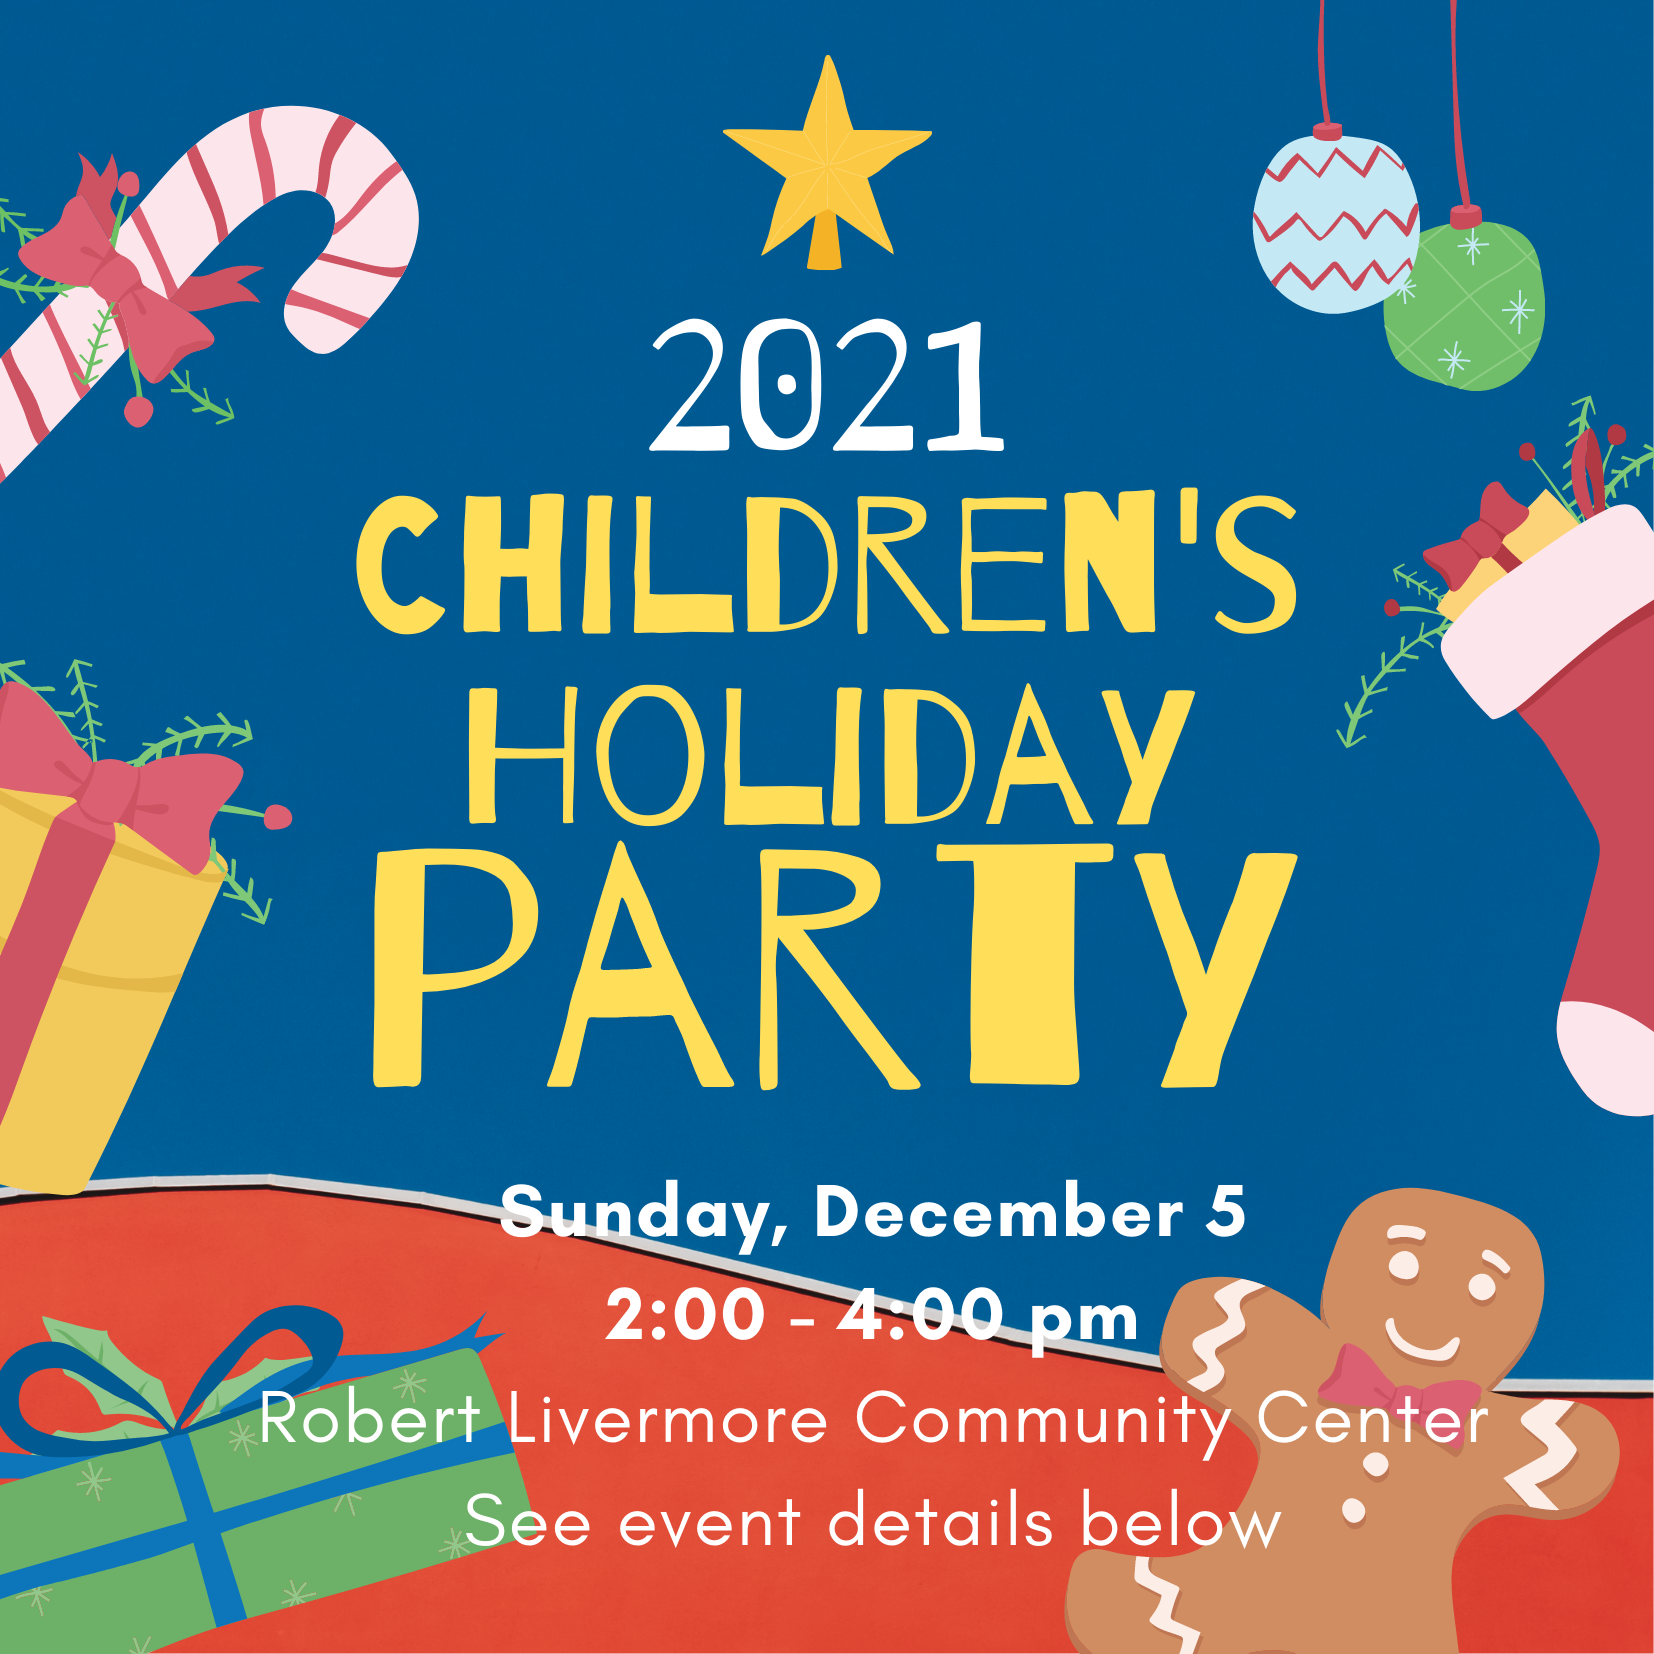 Link to Holiday Party Event Information